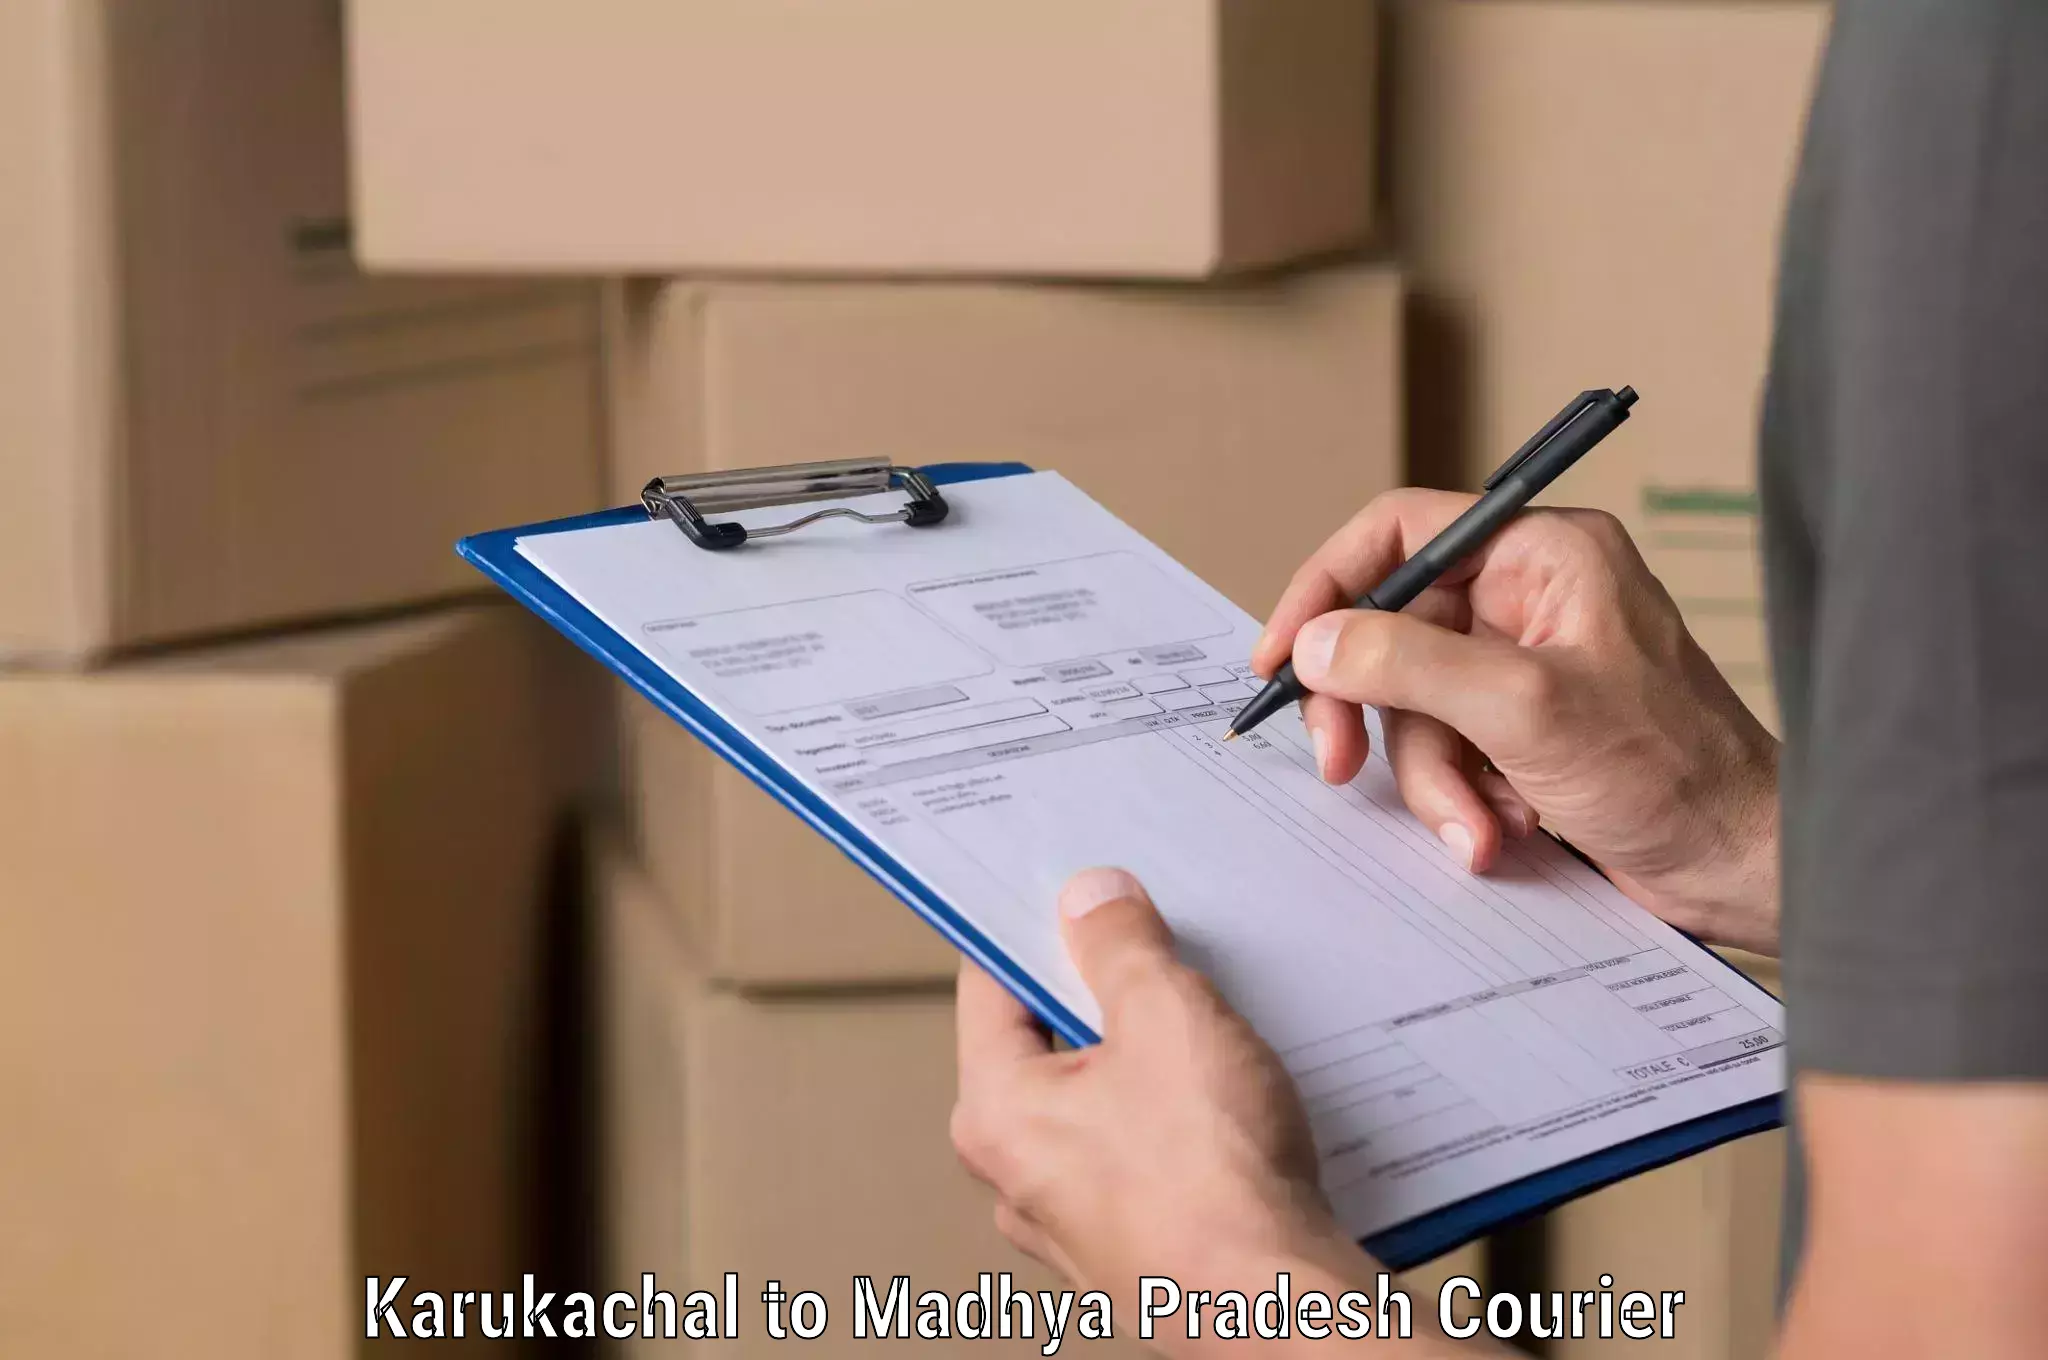 Optimized shipping services Karukachal to Depalpur